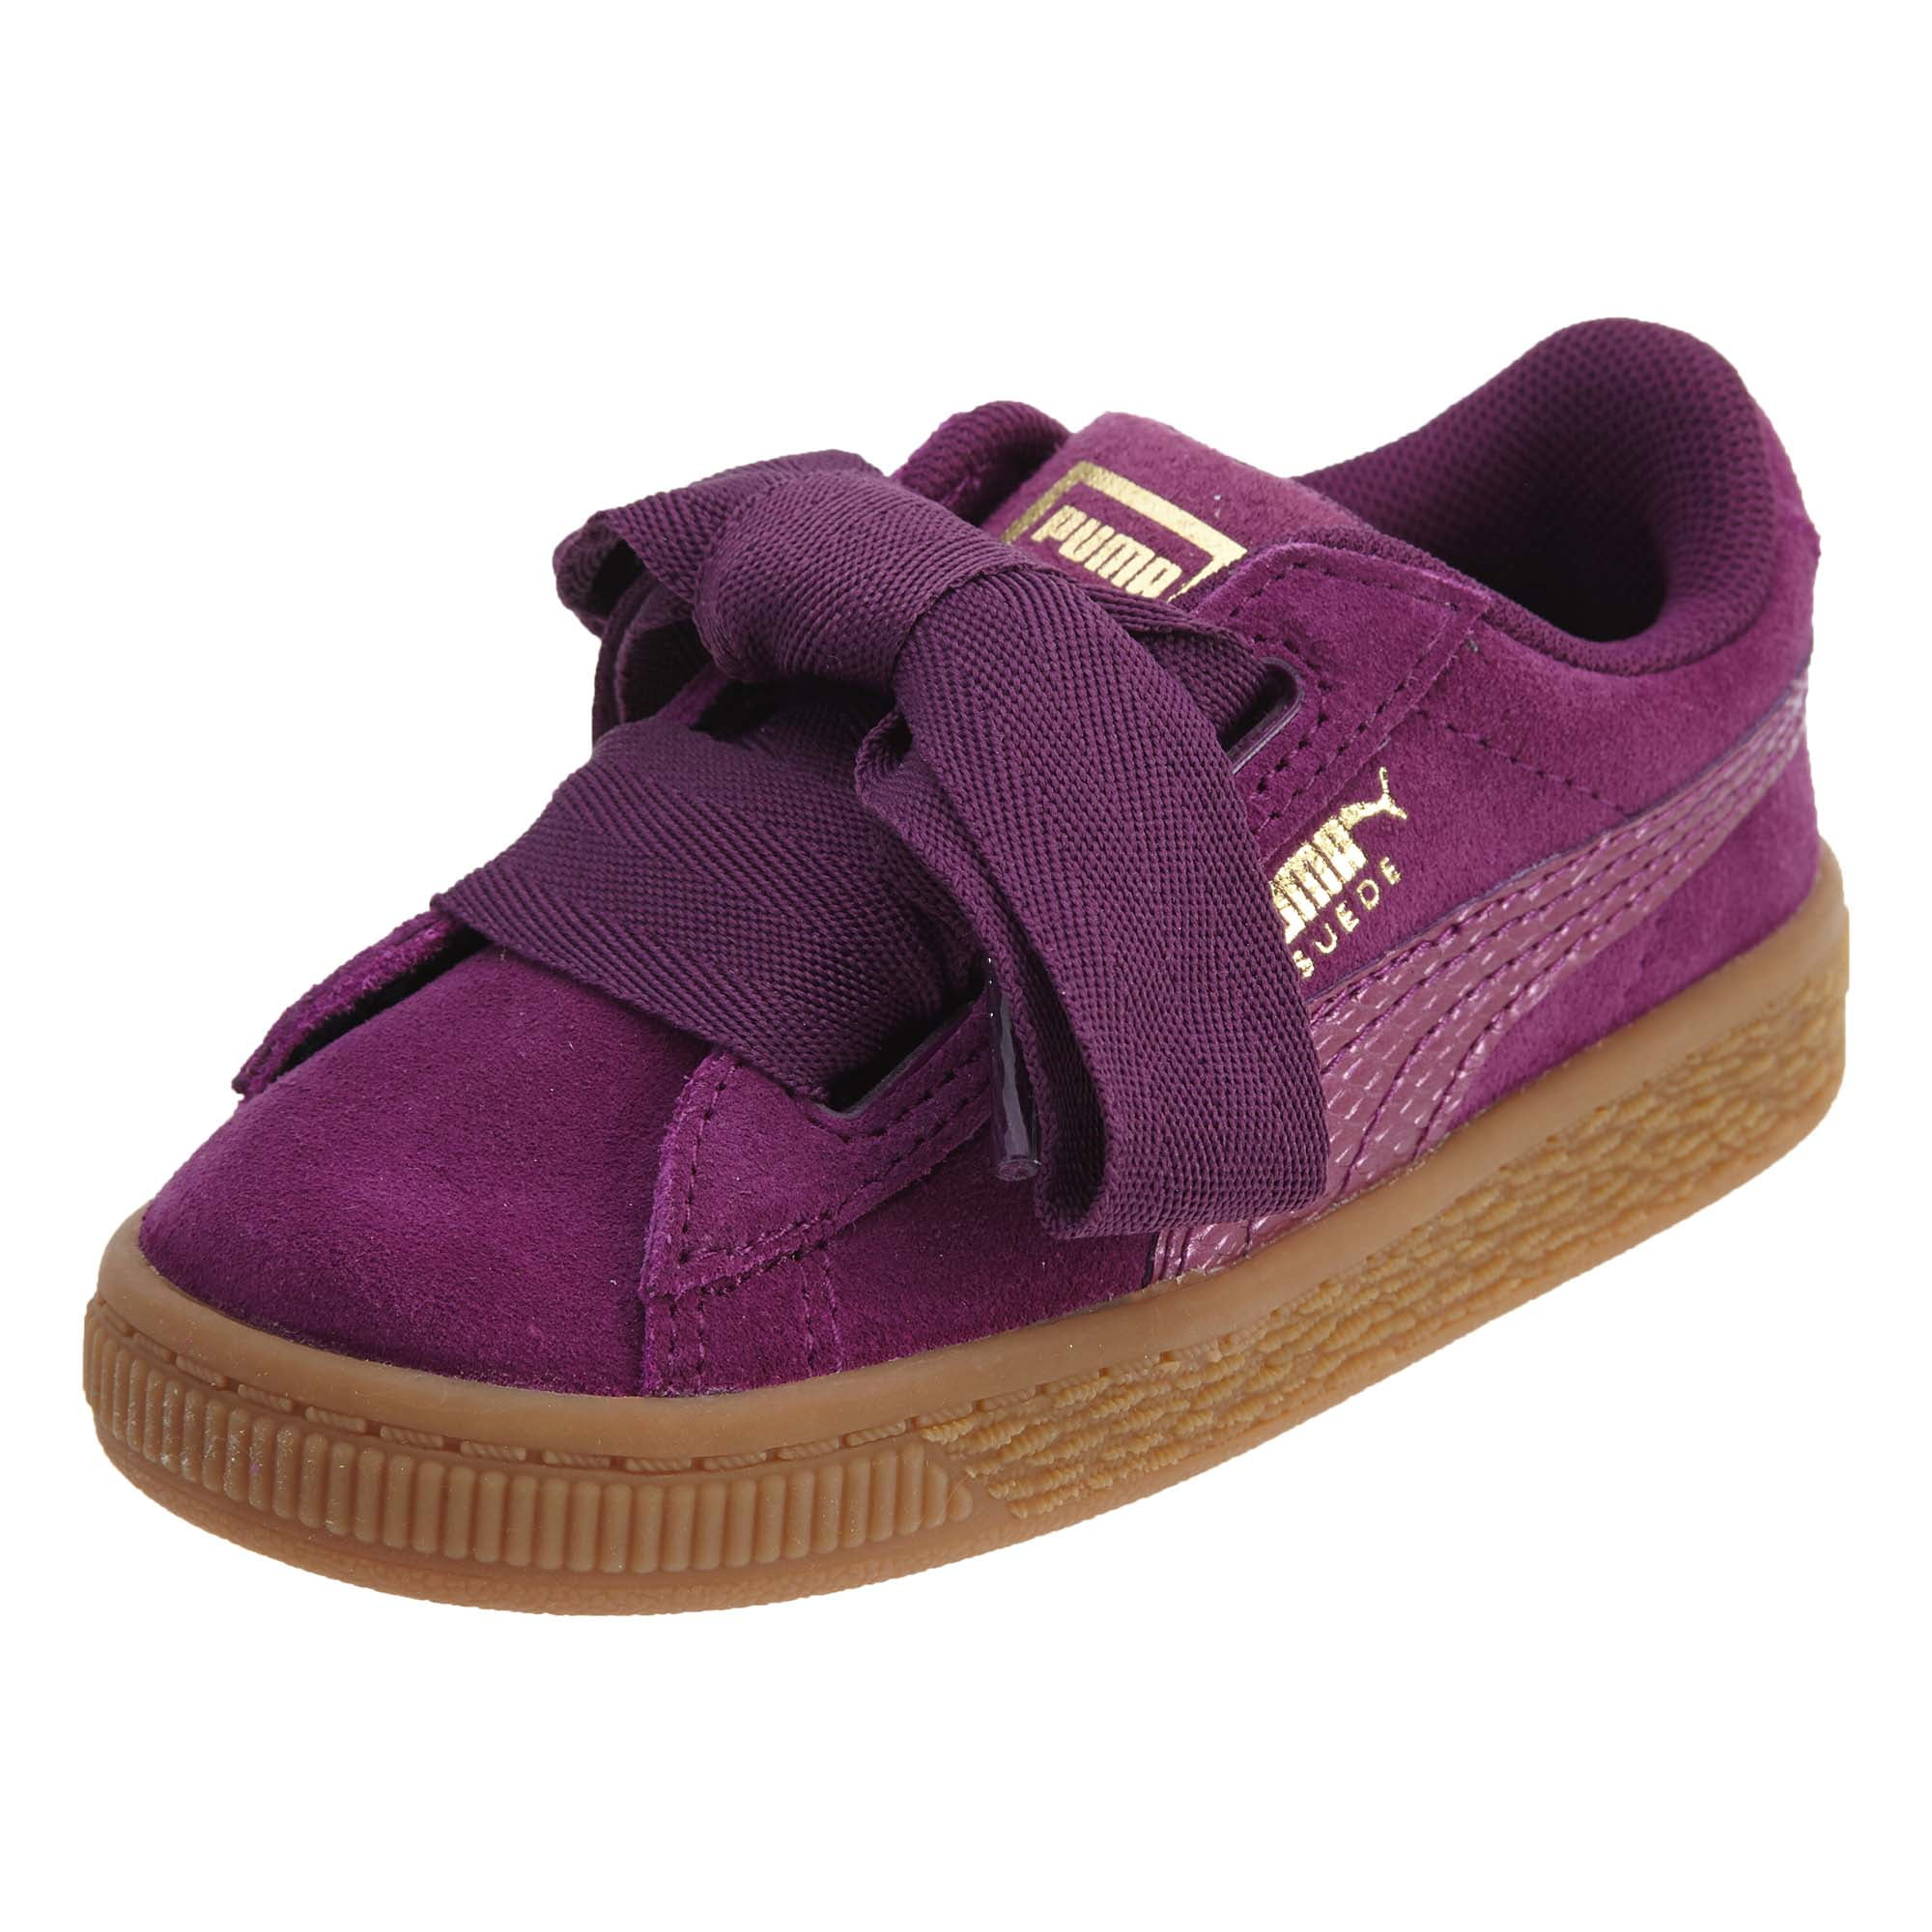 puma suede heart baby shoes